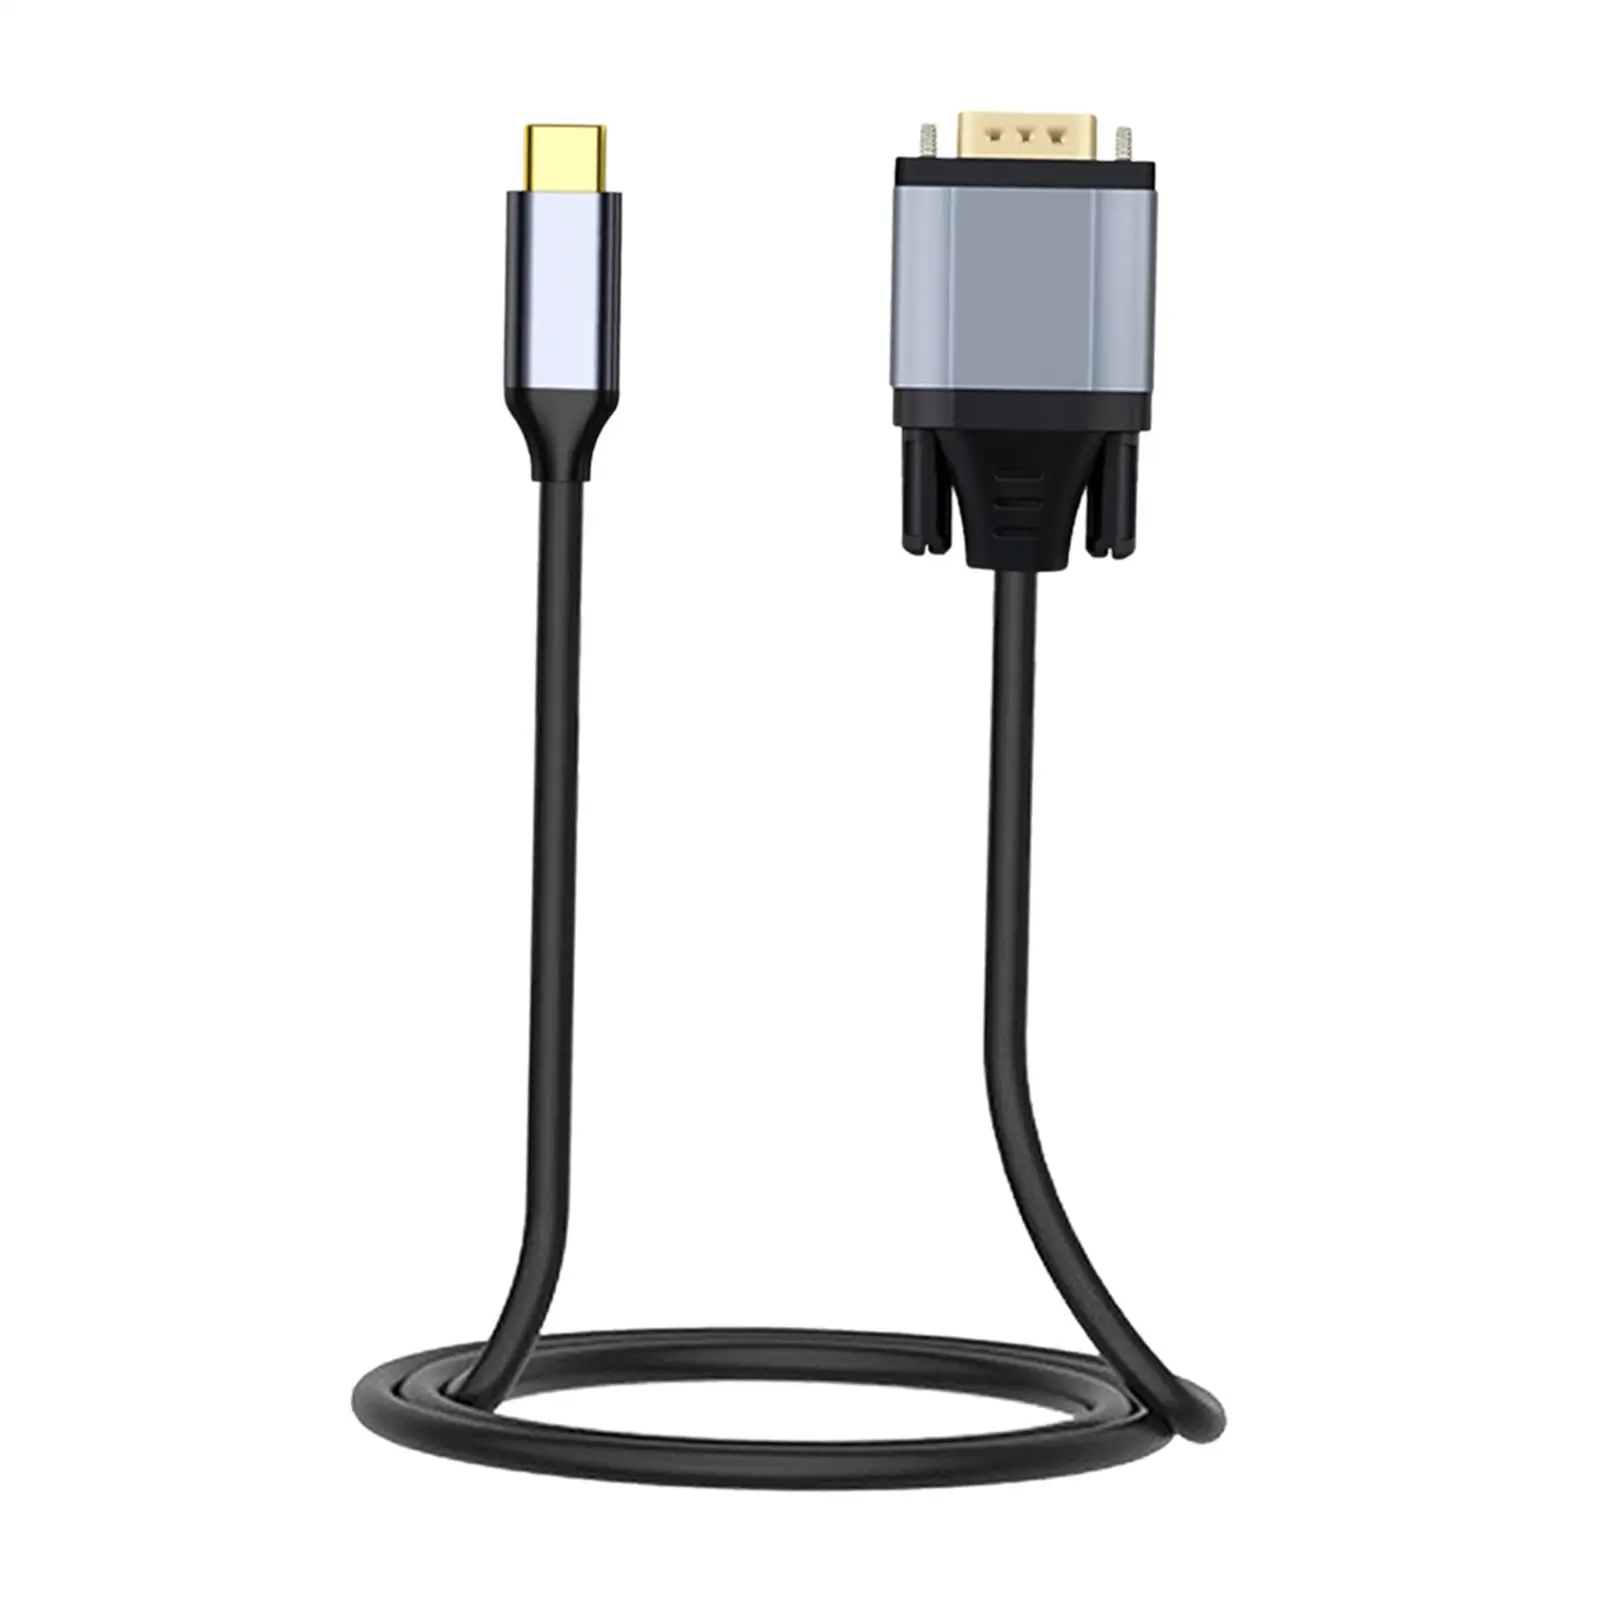 USB3.1 Type C to VGA Adapter Cable 1.8 Plug and Gbps ,Durable 1080P ,Converter for Projector, Screen Monitor